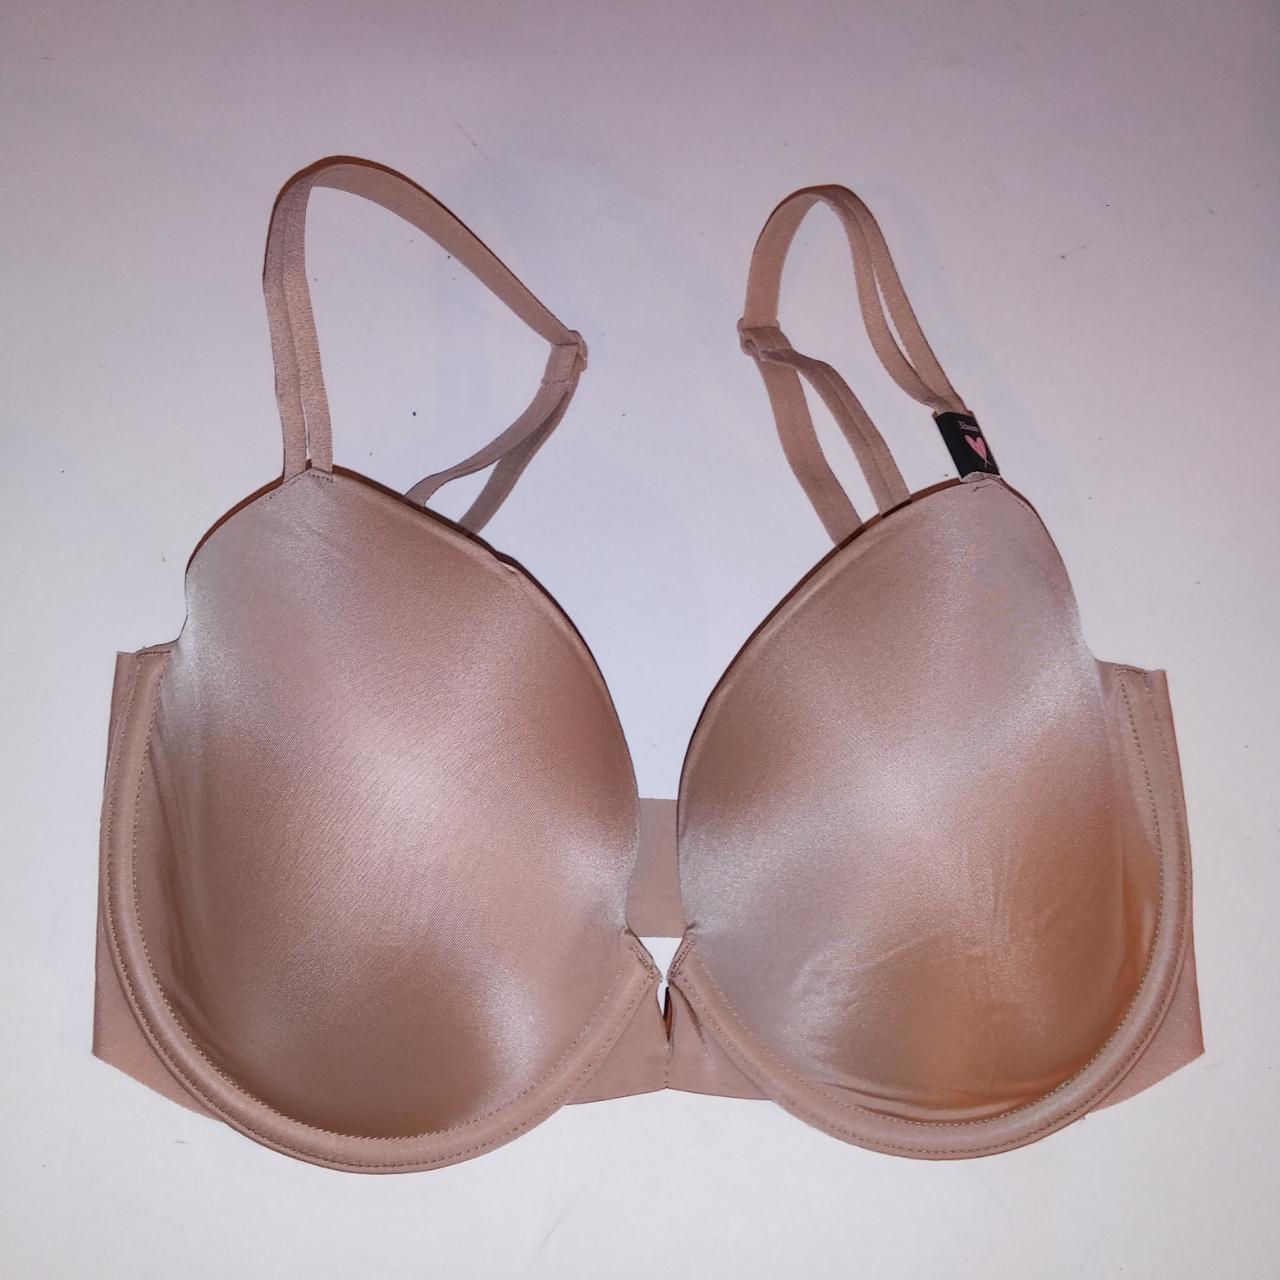 New Victoria's Secret Very Sexy push up bra 32DDD New with tags